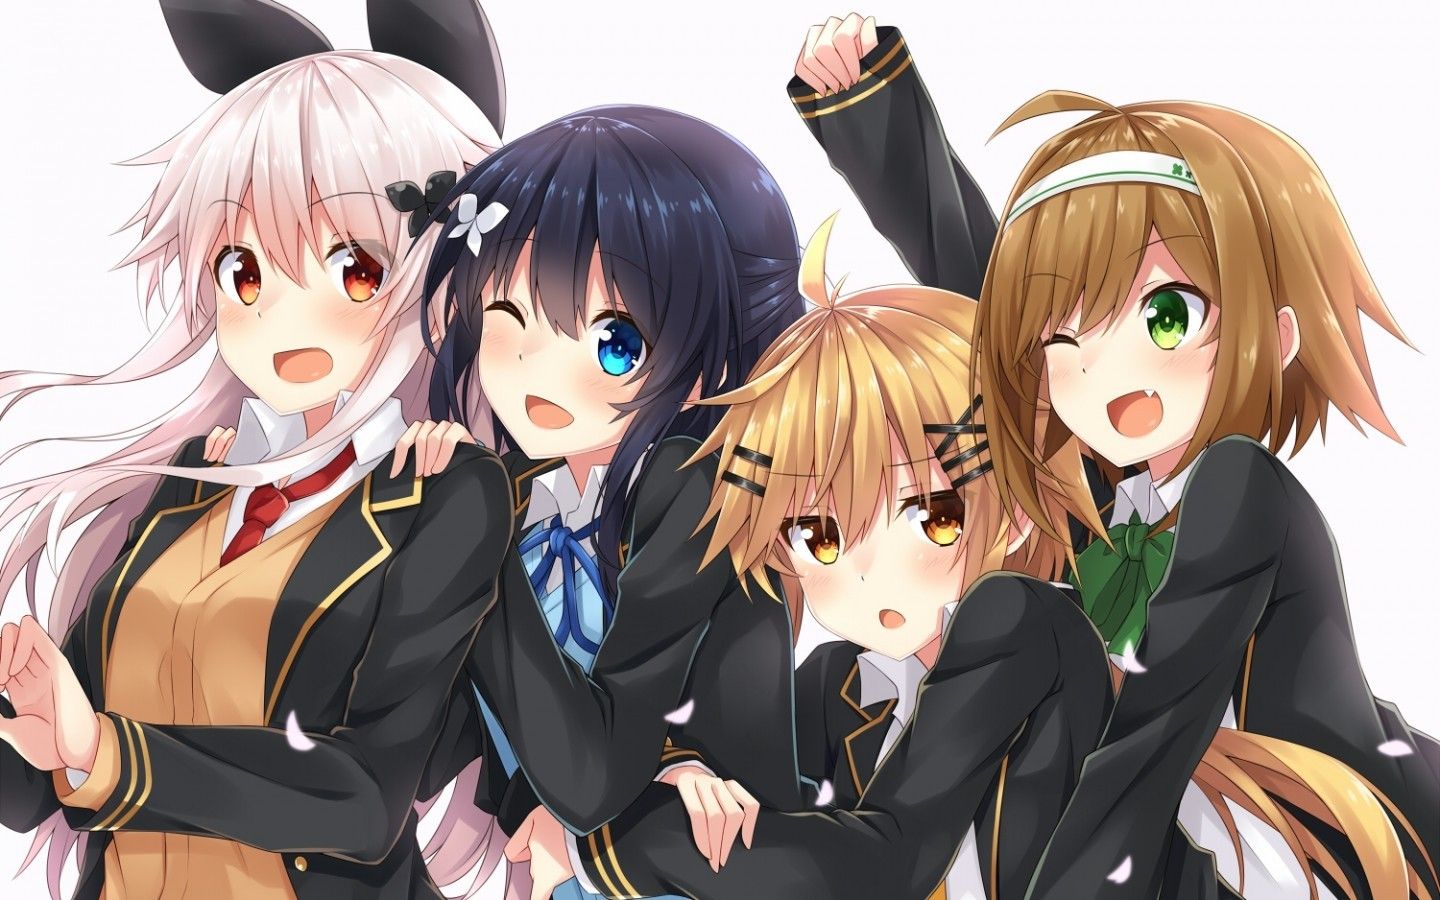 Download 1440x900 Anime Girls, Friends, Wink, Smiling, Happy